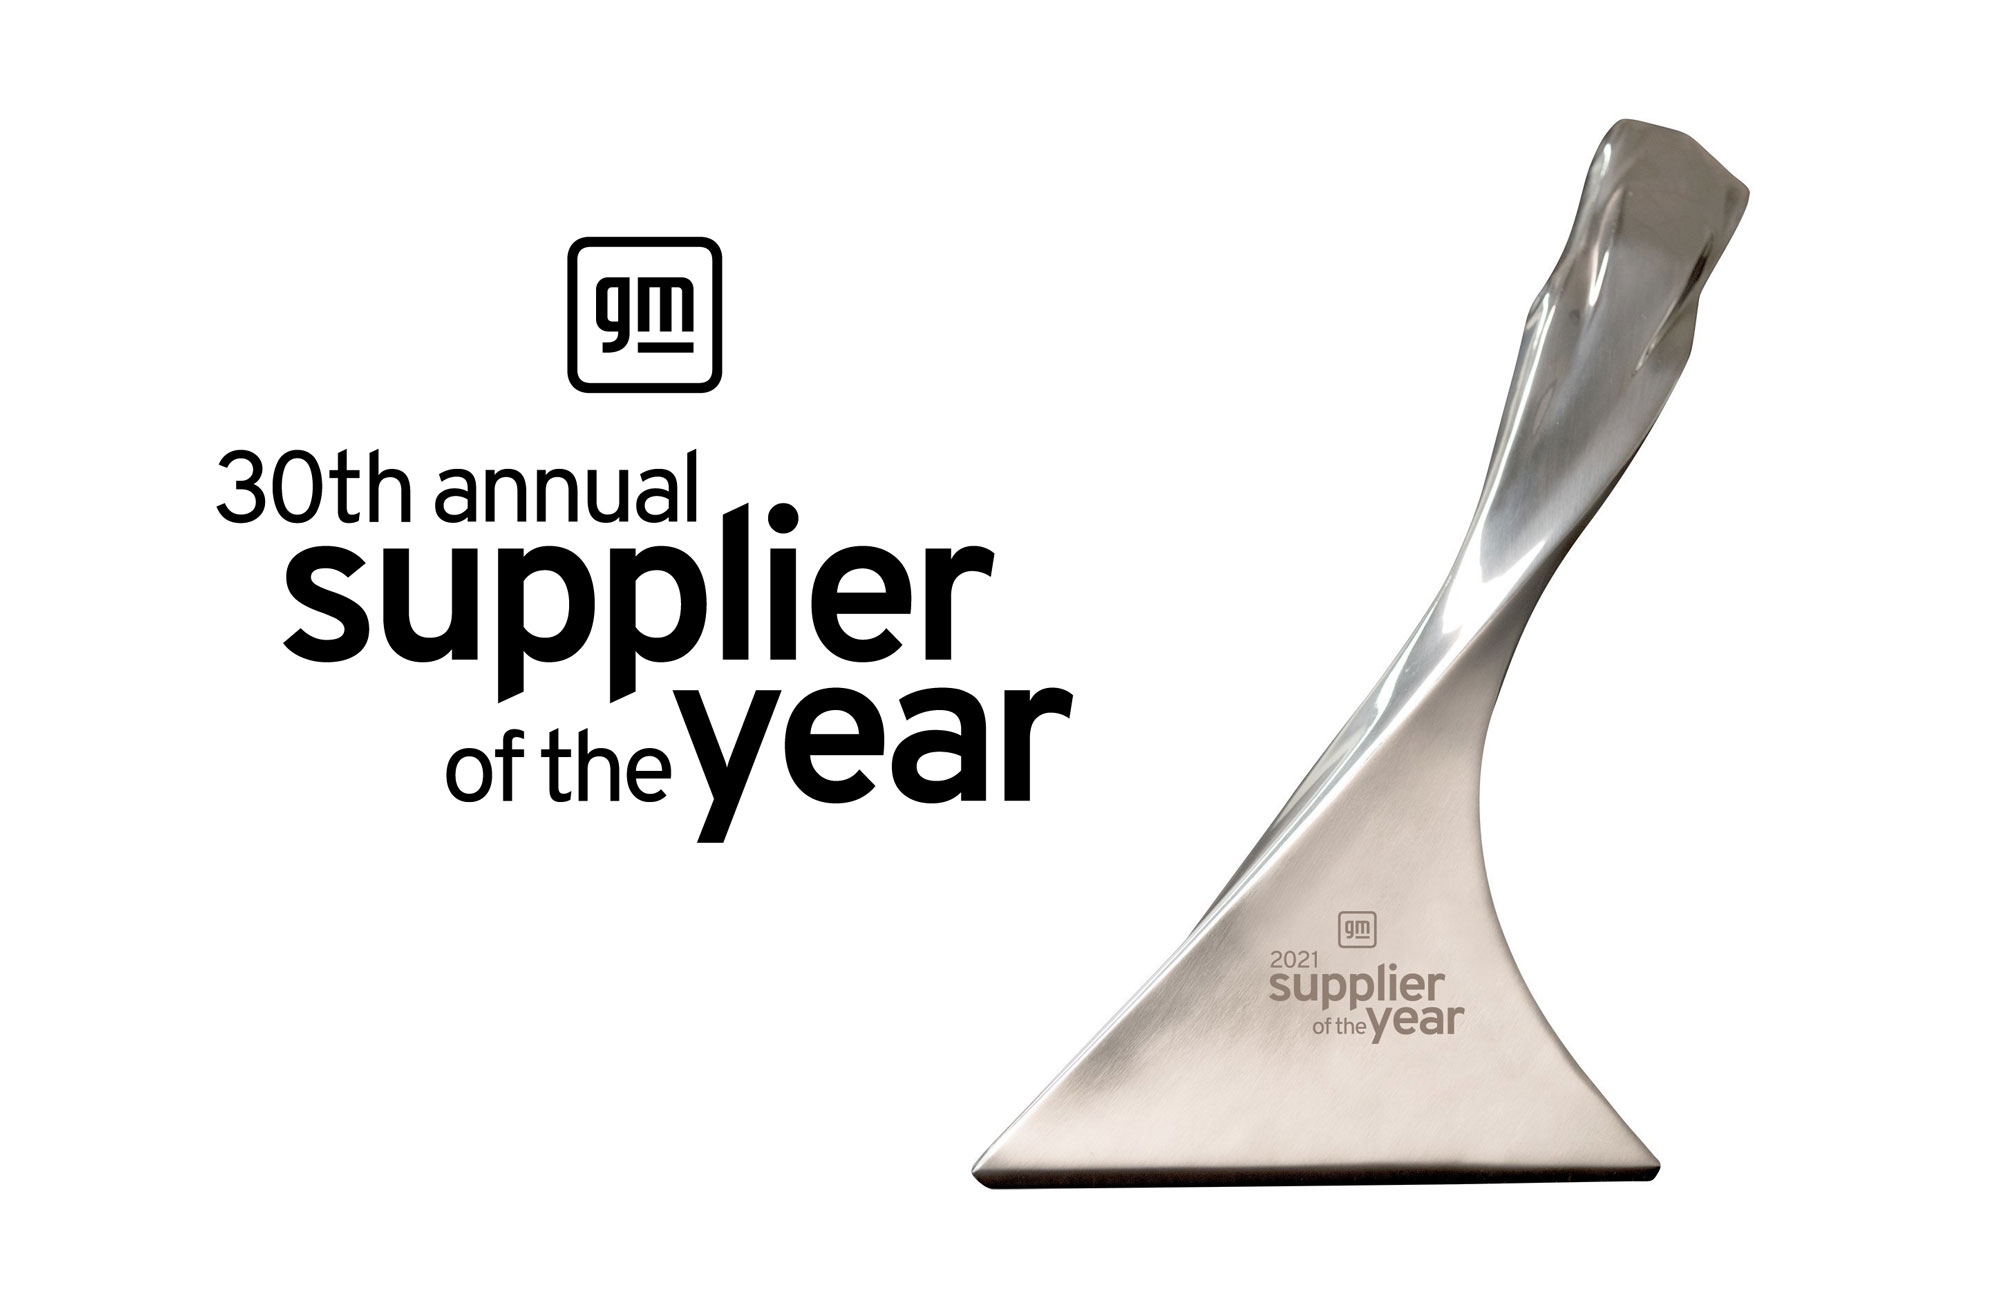 General Motors 2021 Supplier of the Year logo and trophy